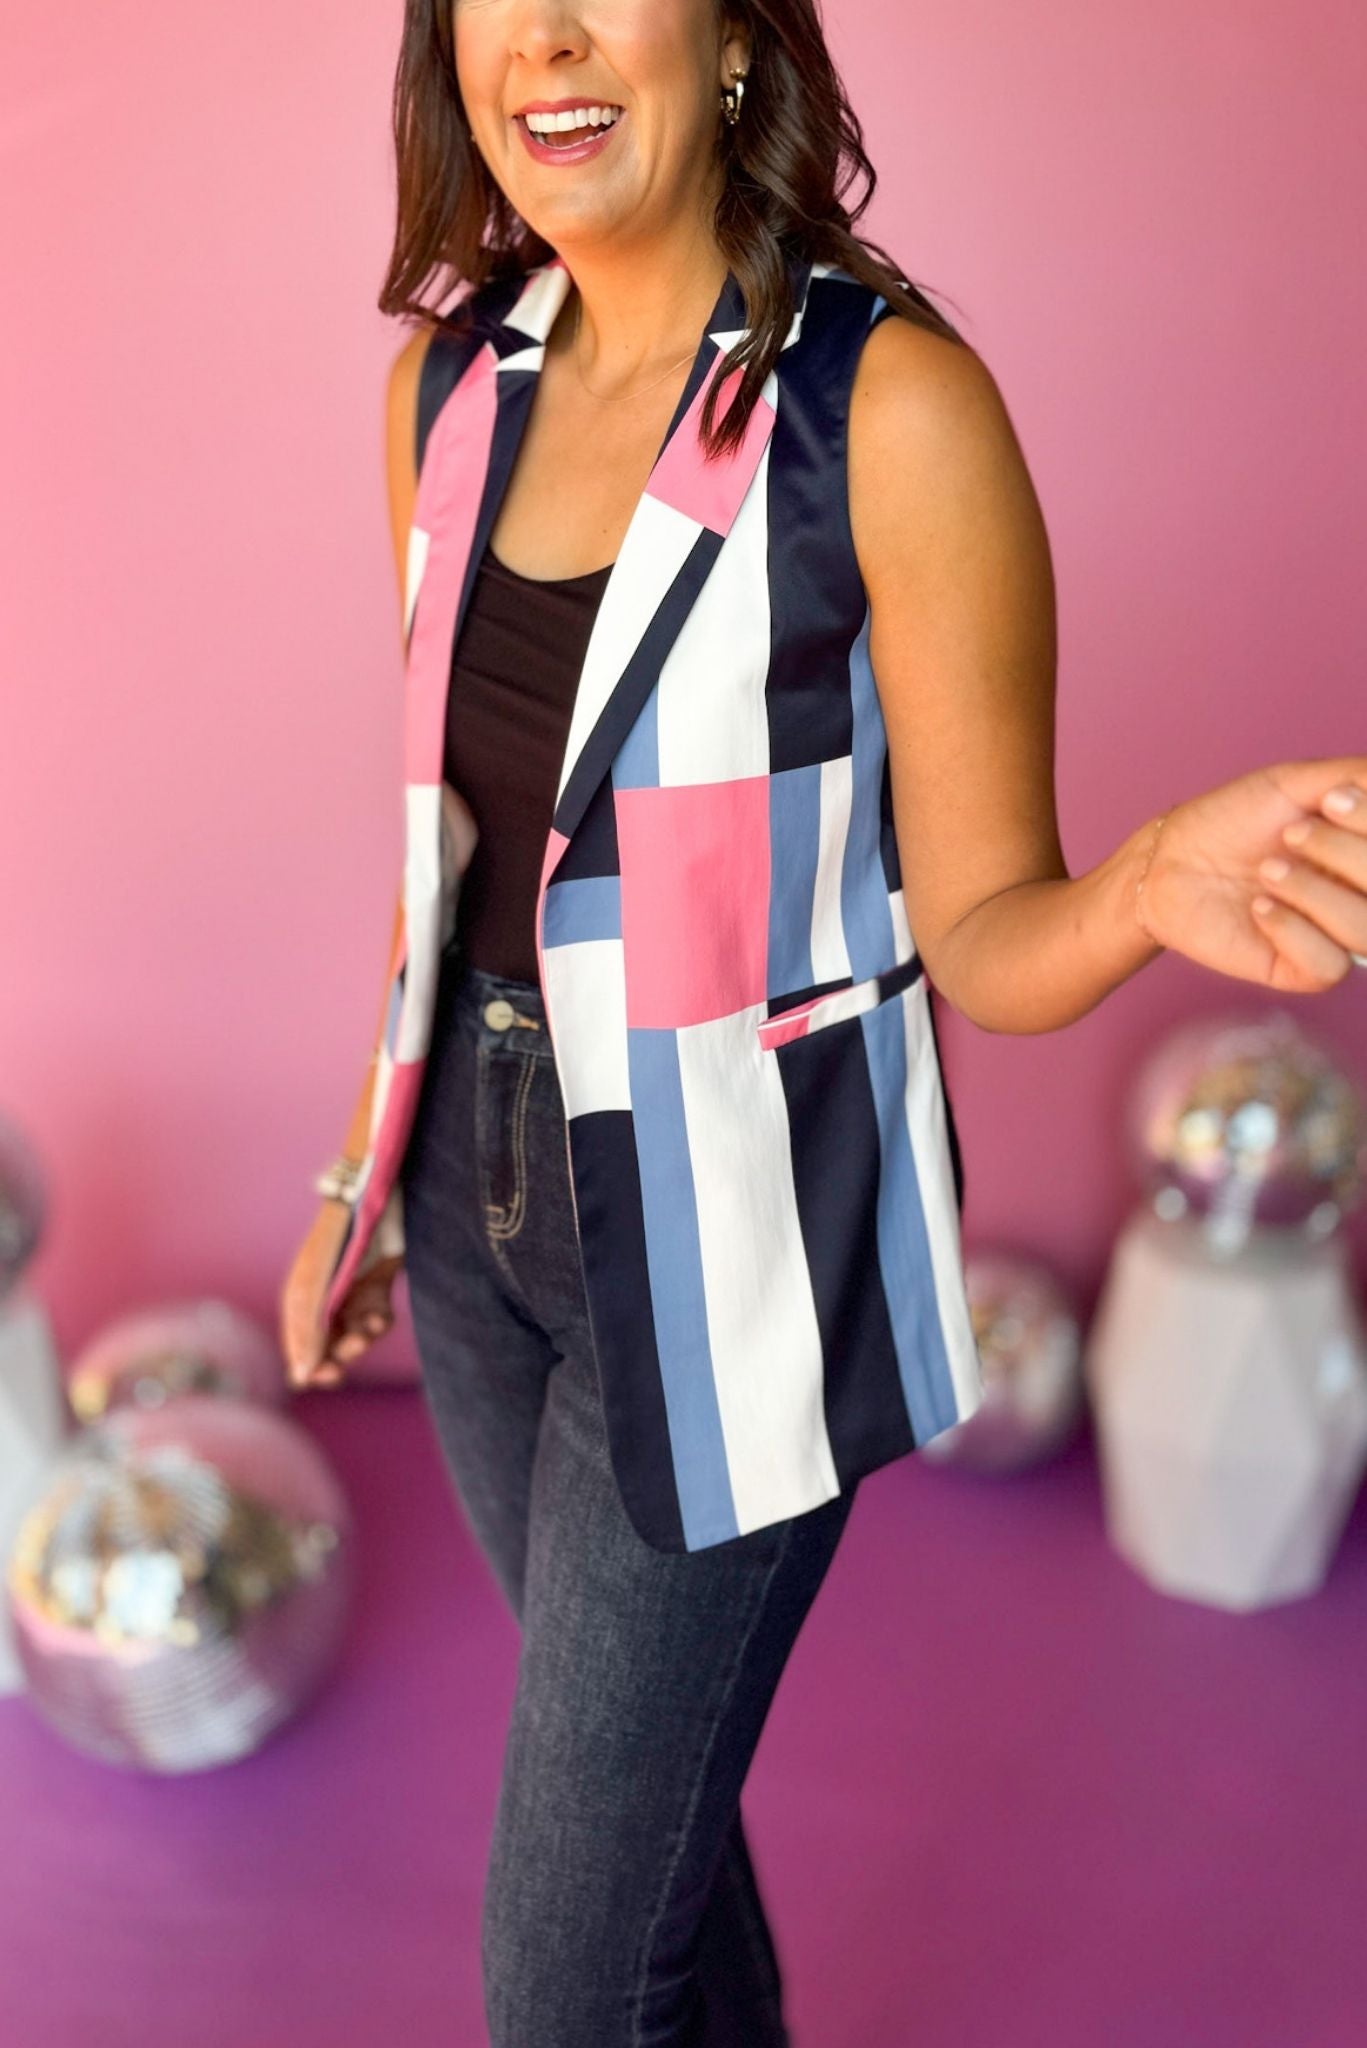 Coral Multi Abstract Printed Colorblock Blazer Vest, must have vest, must have style, elevated style, elevated vest, fall style, fall fashion, fall vest, vest, mom style, shop style your senses by mallory fitzsimmons